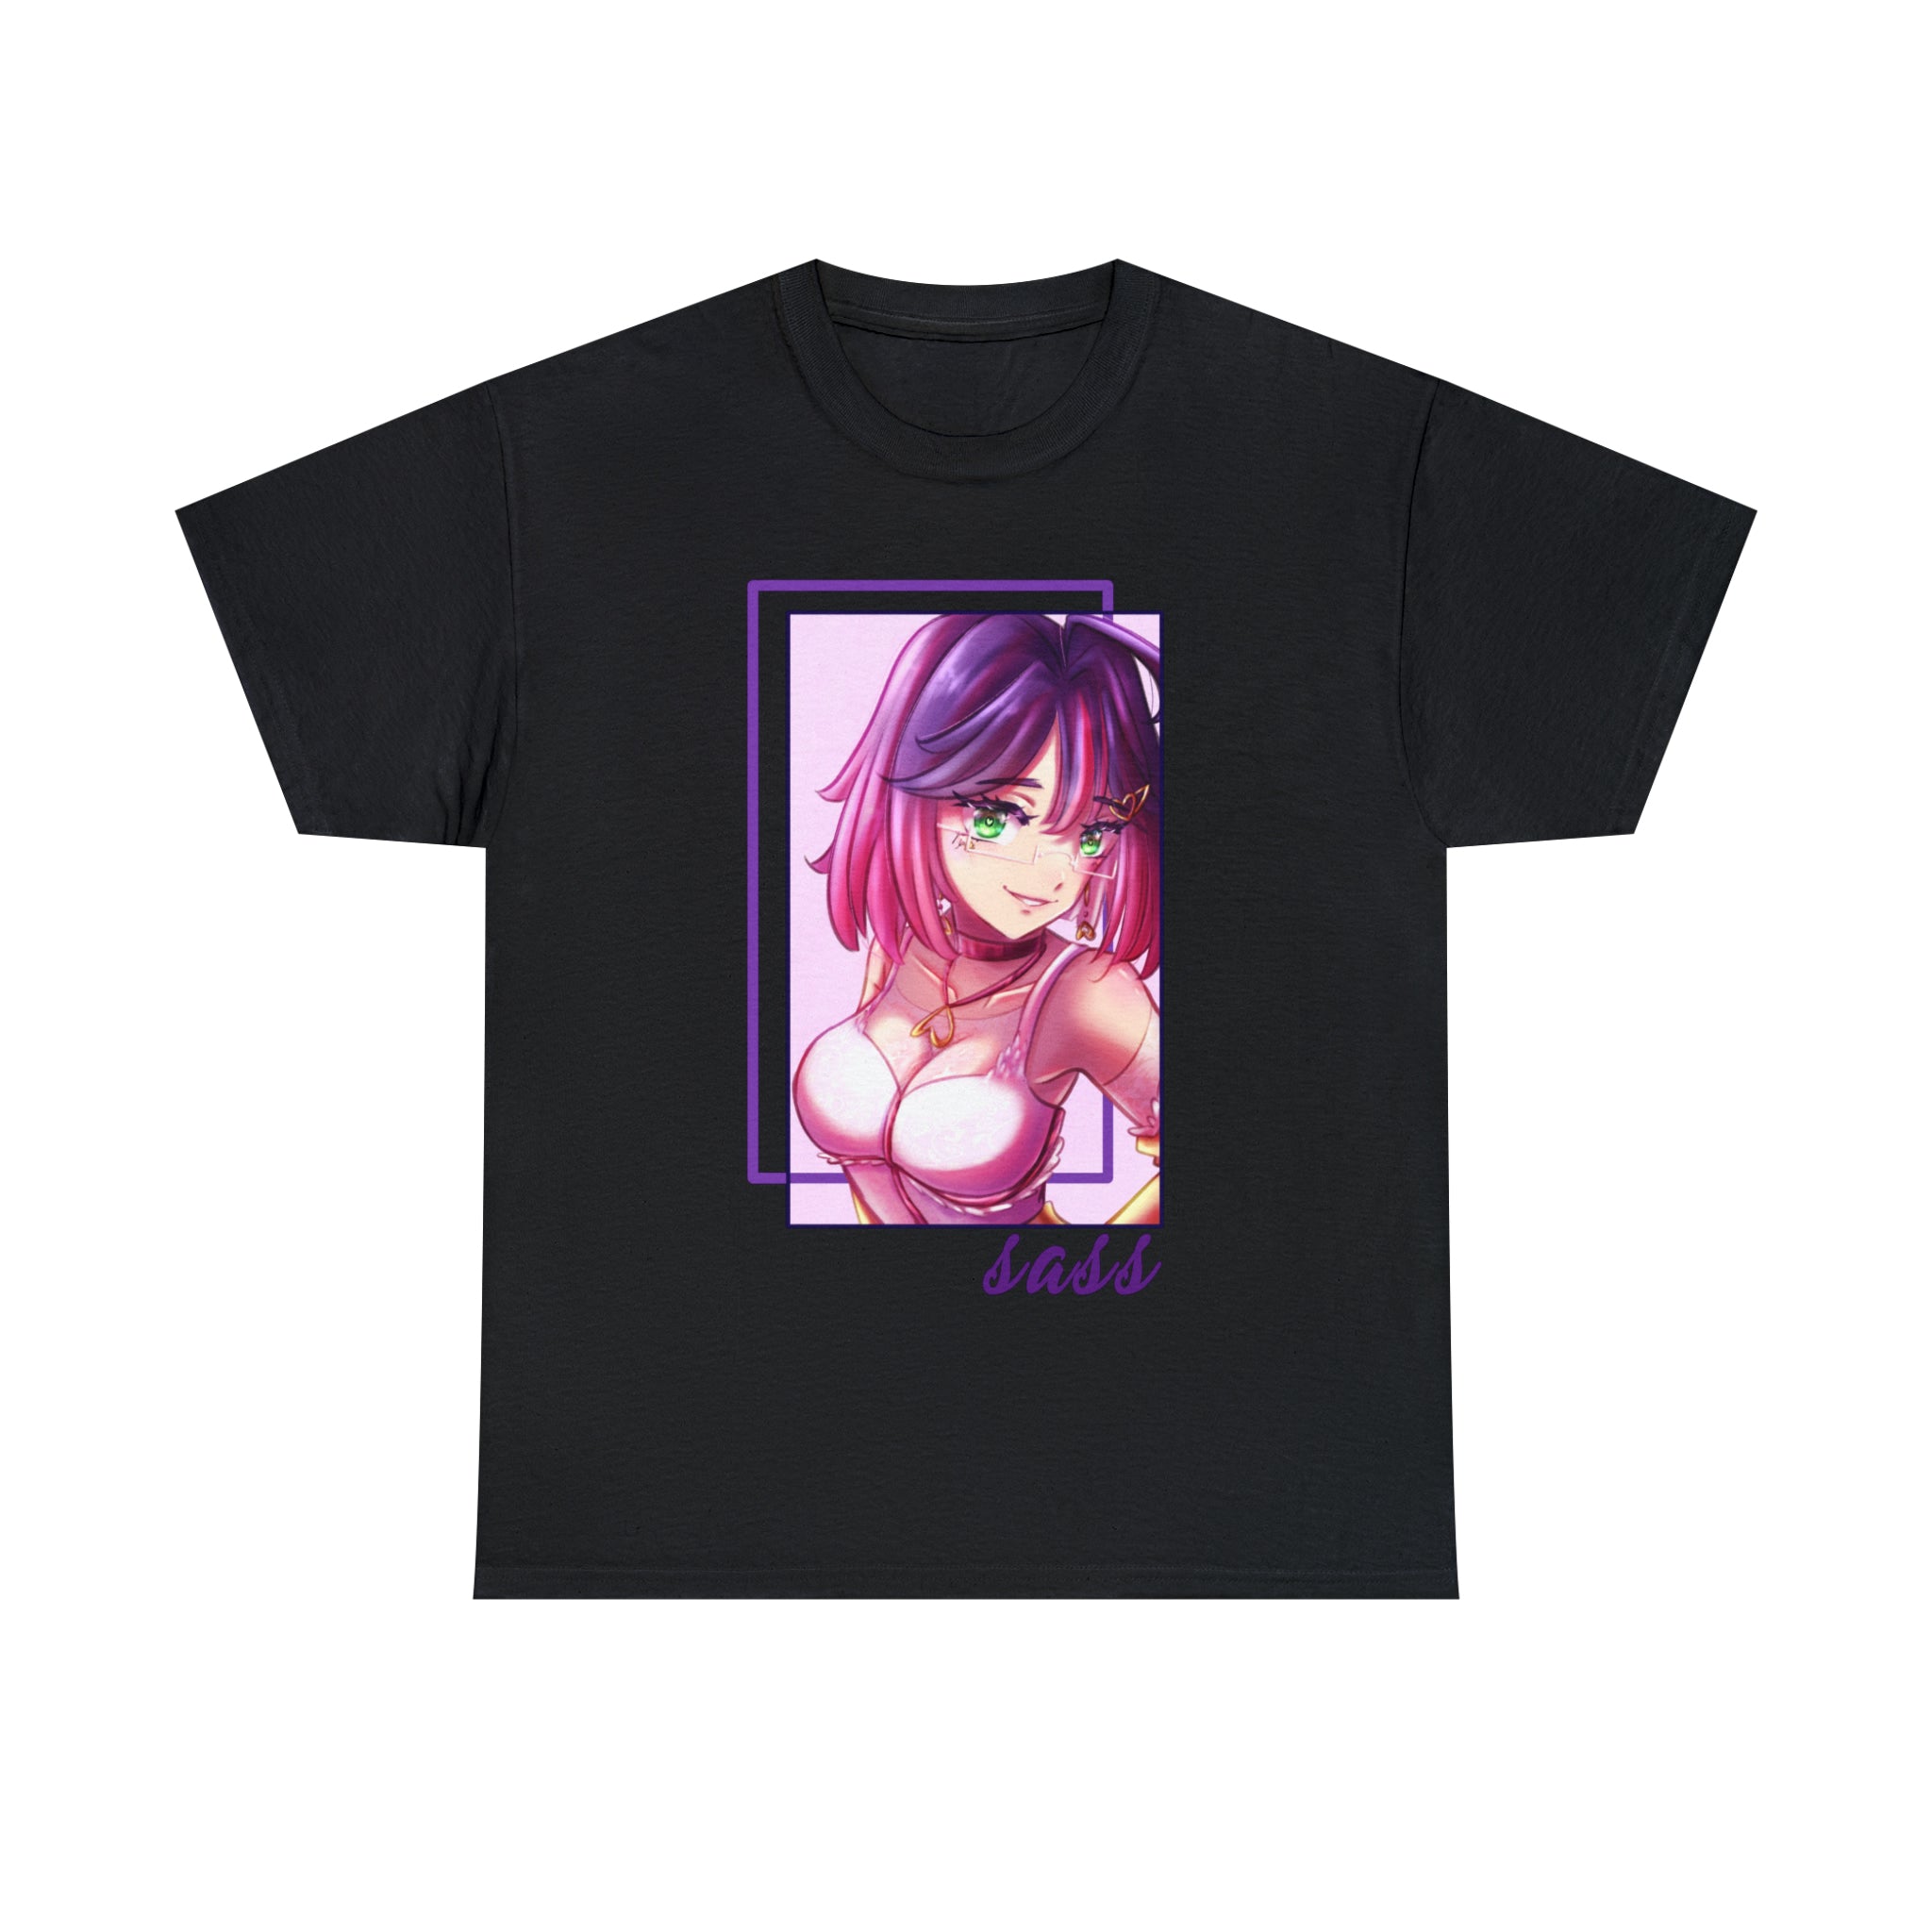 A Sass t-shirt showcasing a captivating artwork of a girl with vibrant purple hair.